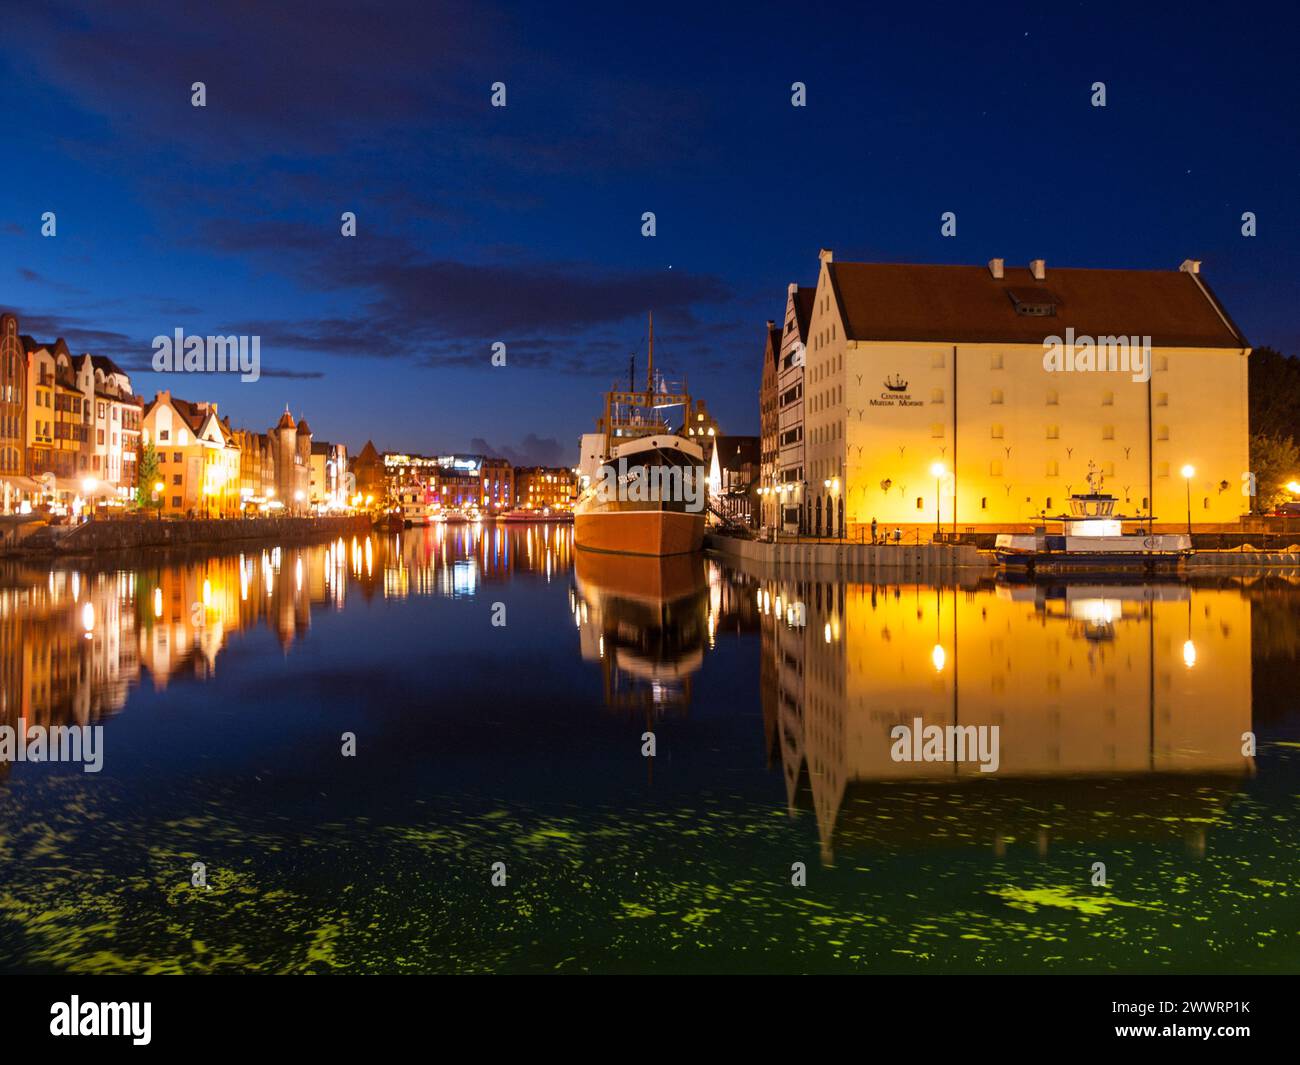 SS Soldek in the centre of Gdansk by night, Poland Stock Photo